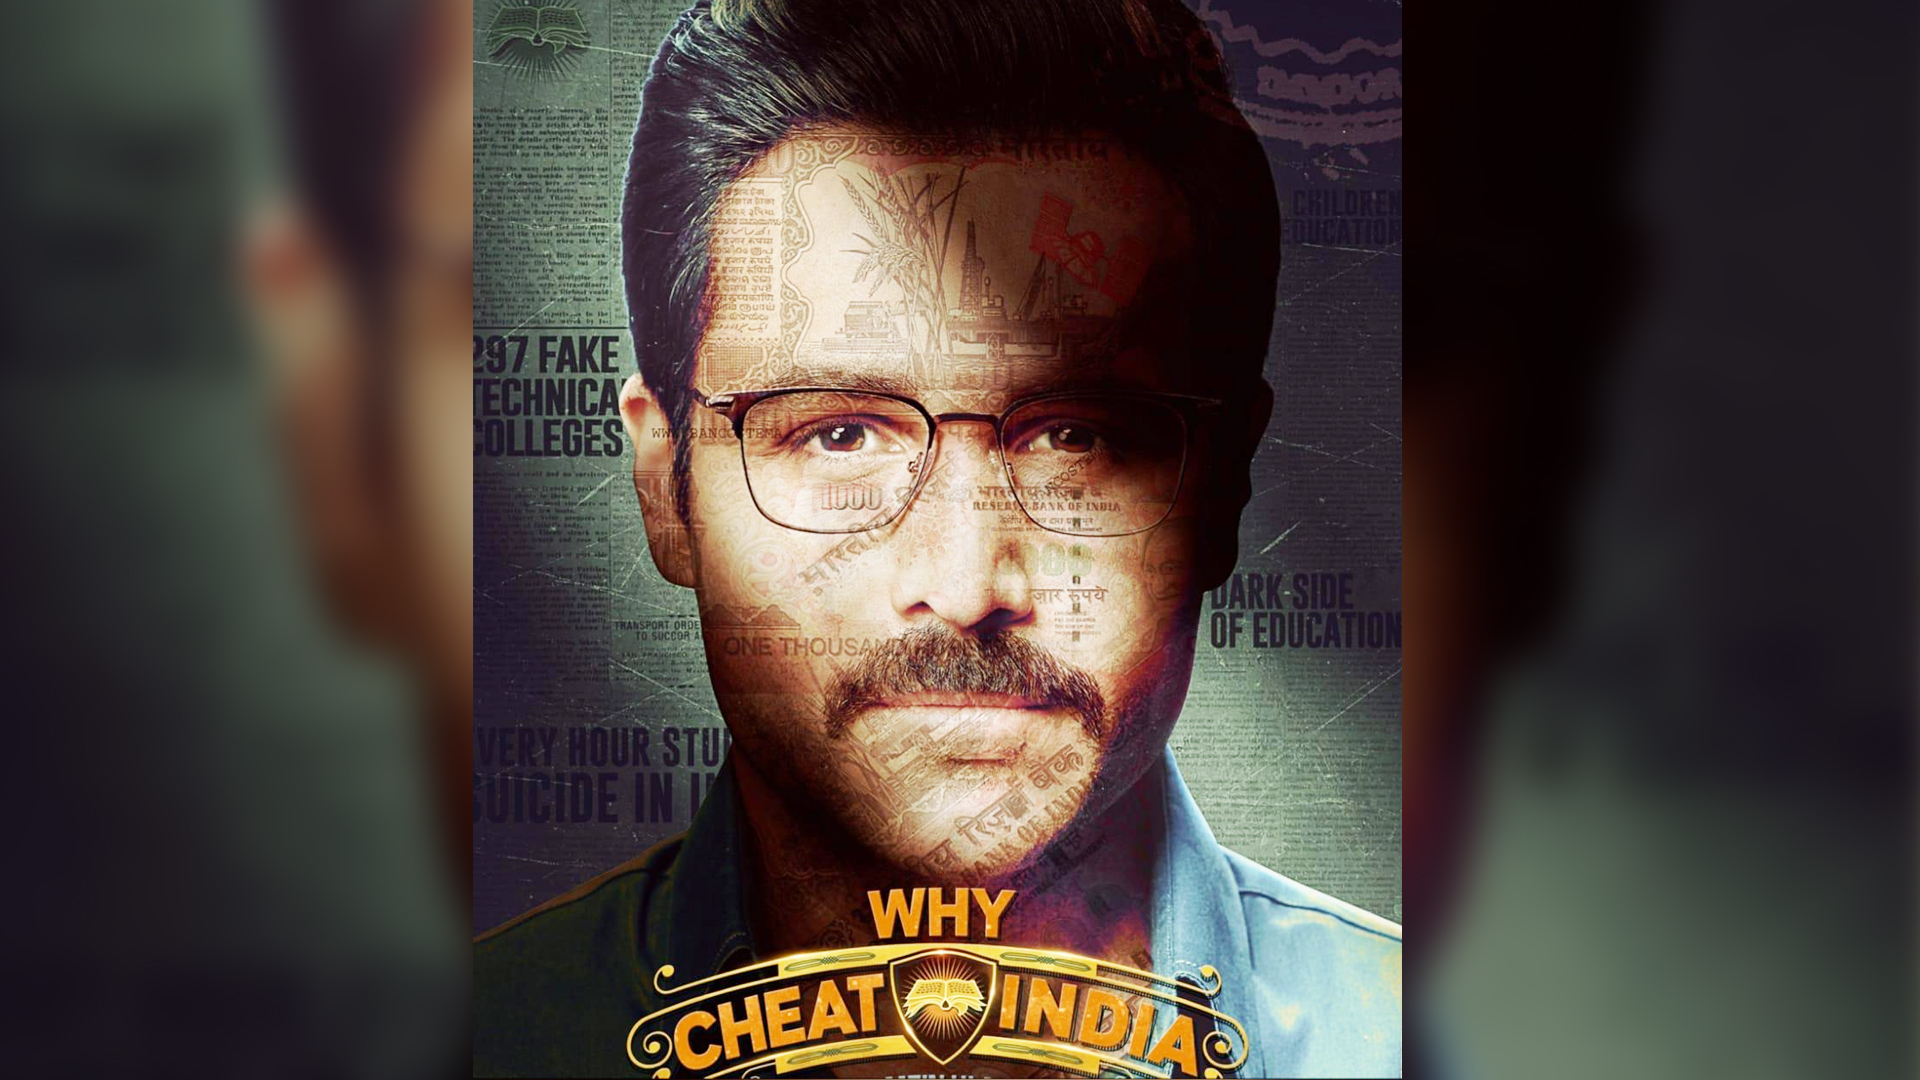 STATEMENT BY THE PRODUCERS OF “CHEAT INDIA” ON THE TITLE CHANGE